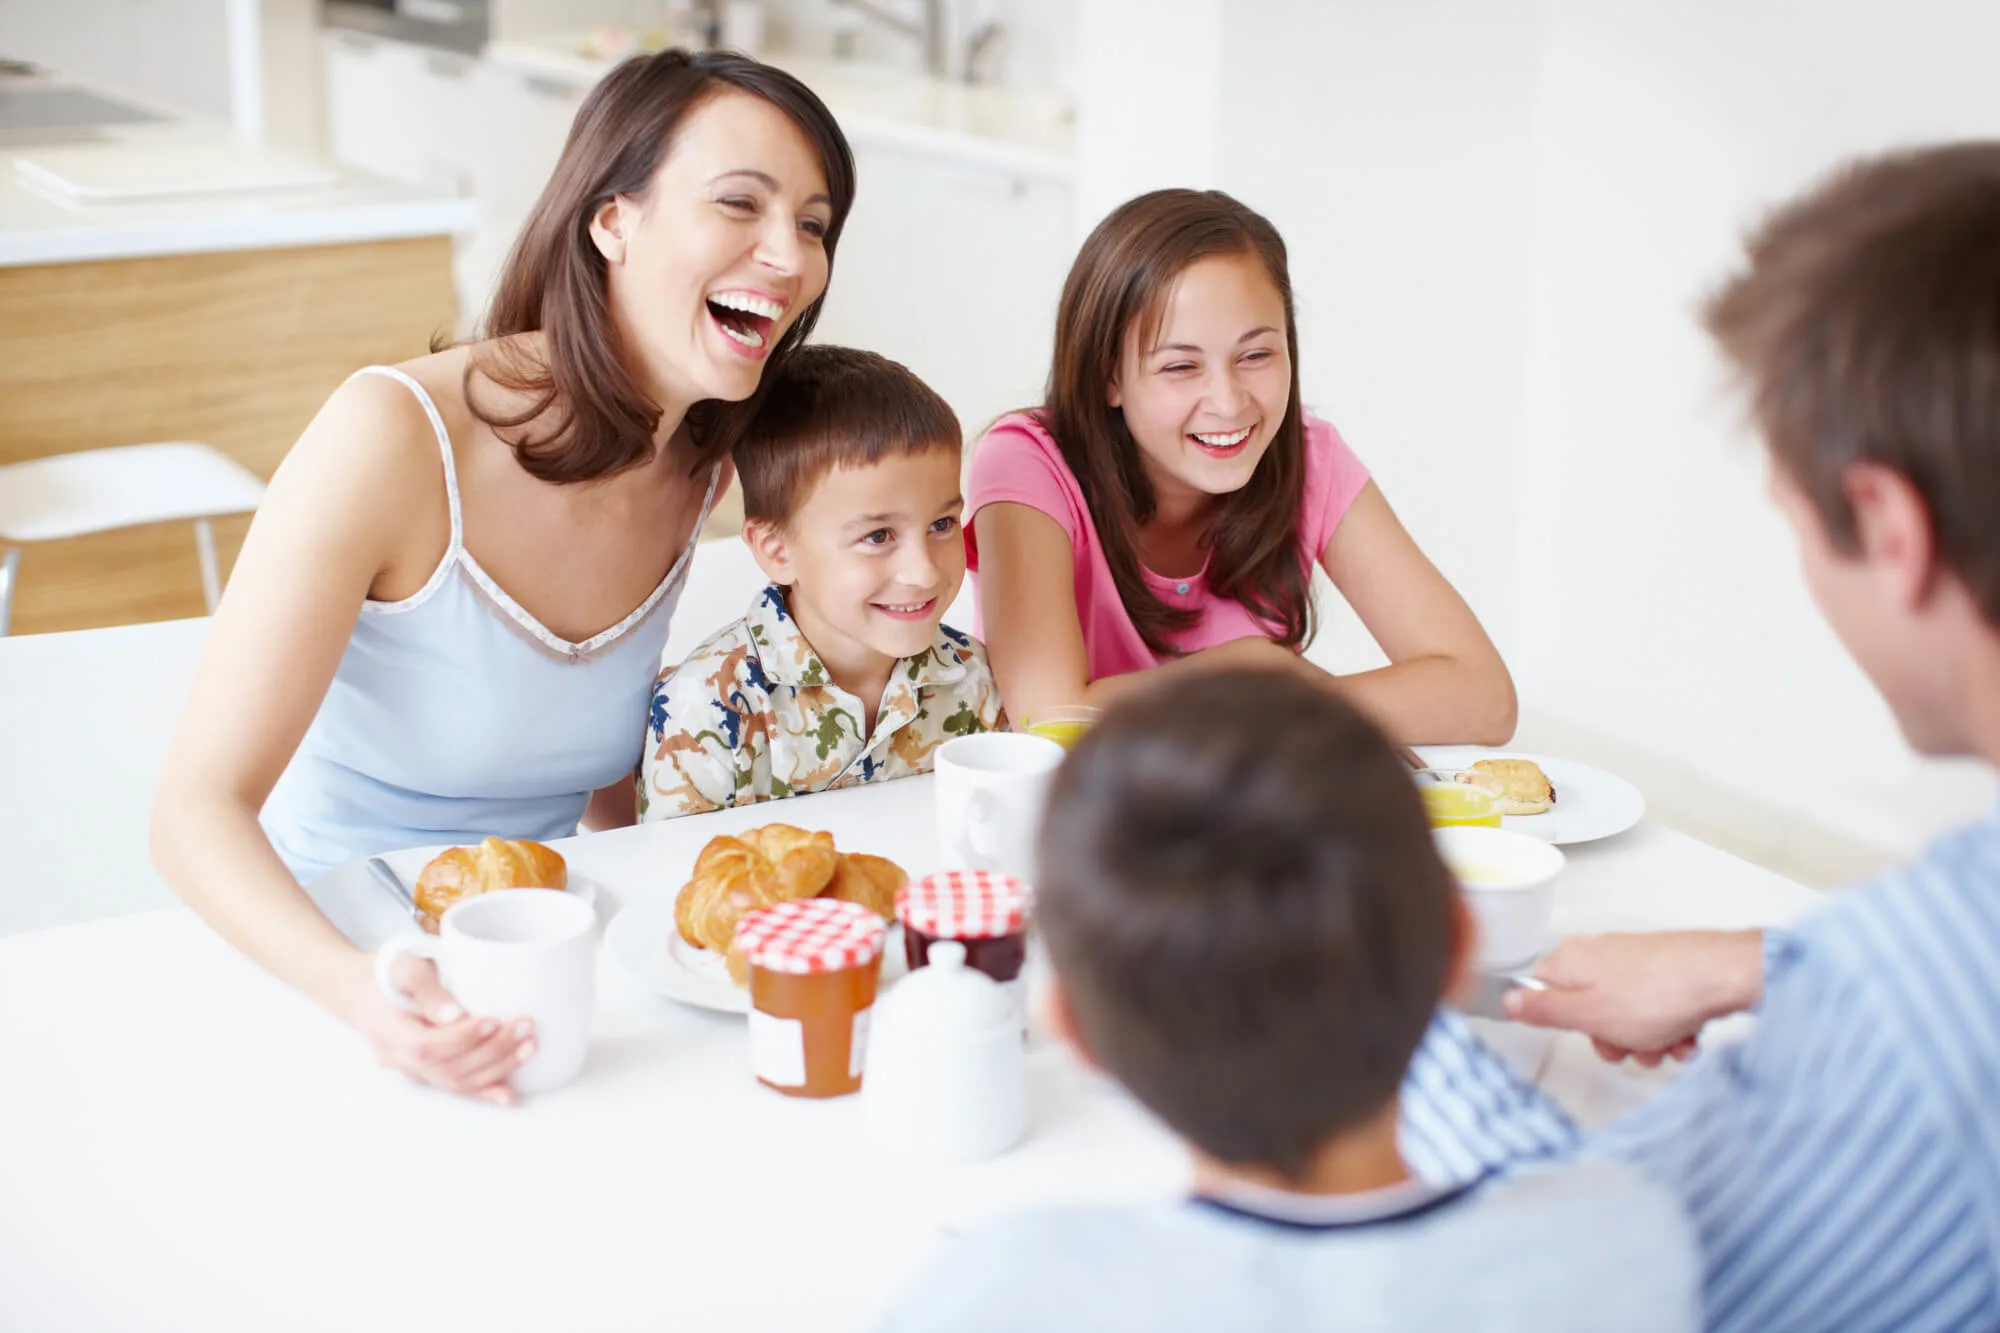 Family with 3 kids eating breakfast and laughing together